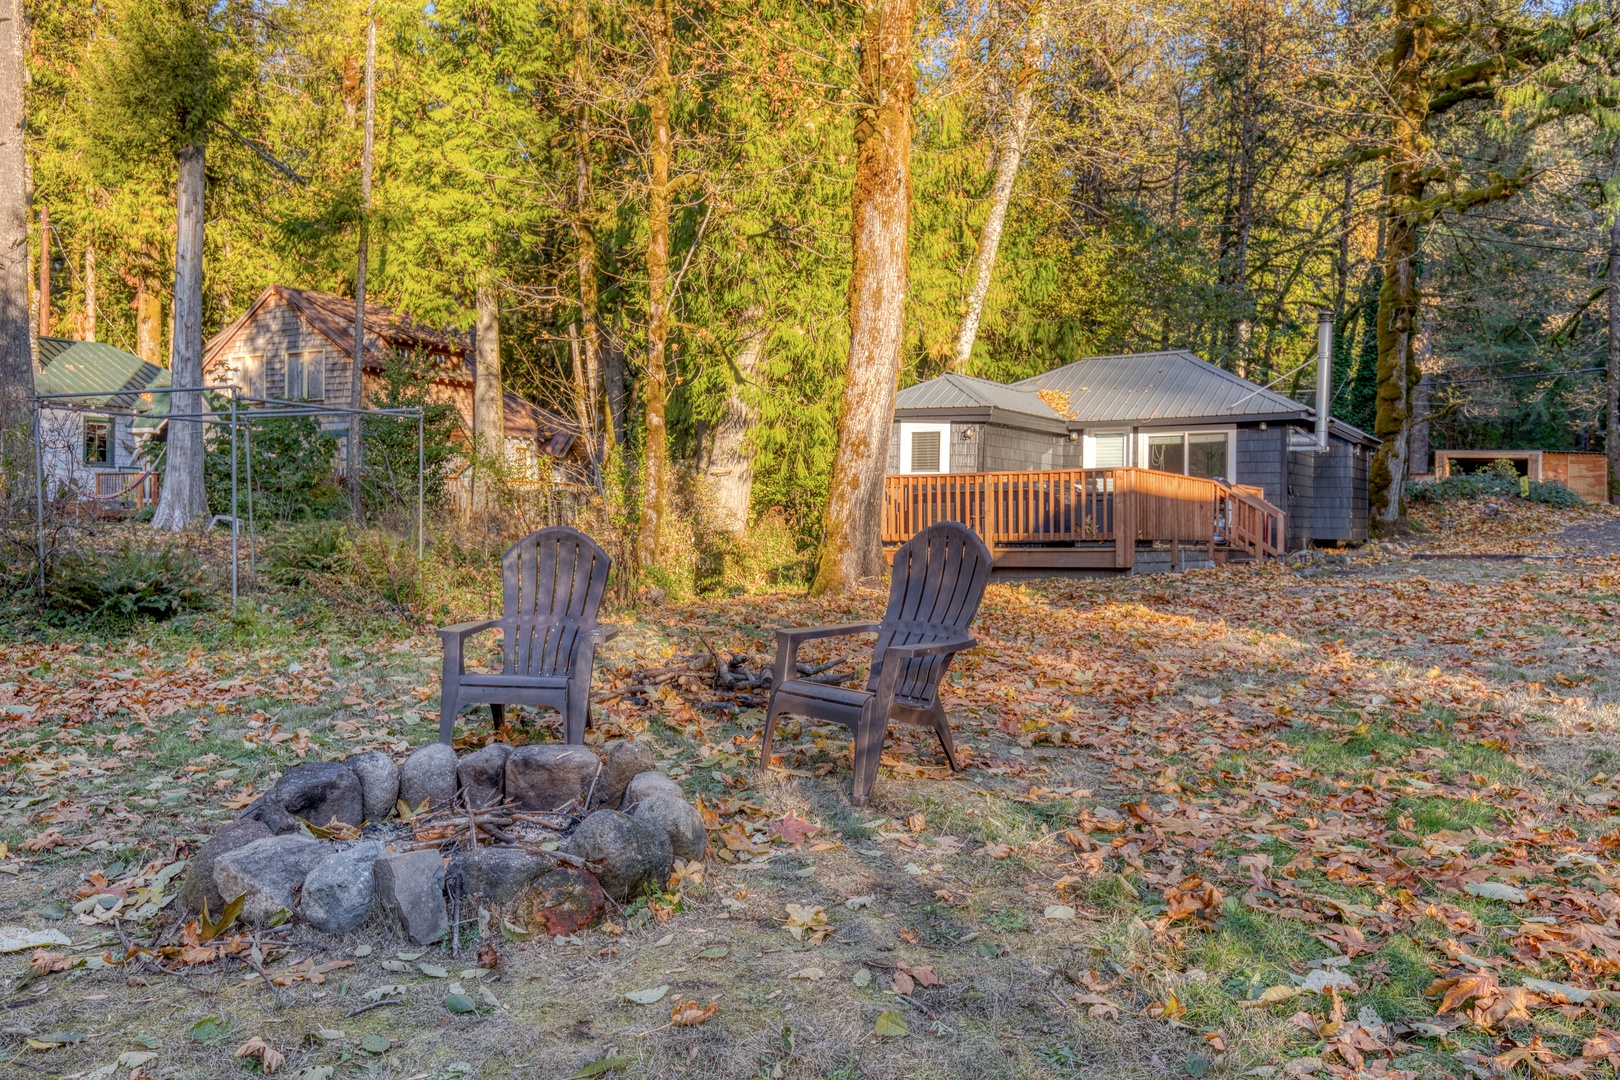 Rhododendron Vacation Rentals, Riverbend Cabin #1 - Fire pit